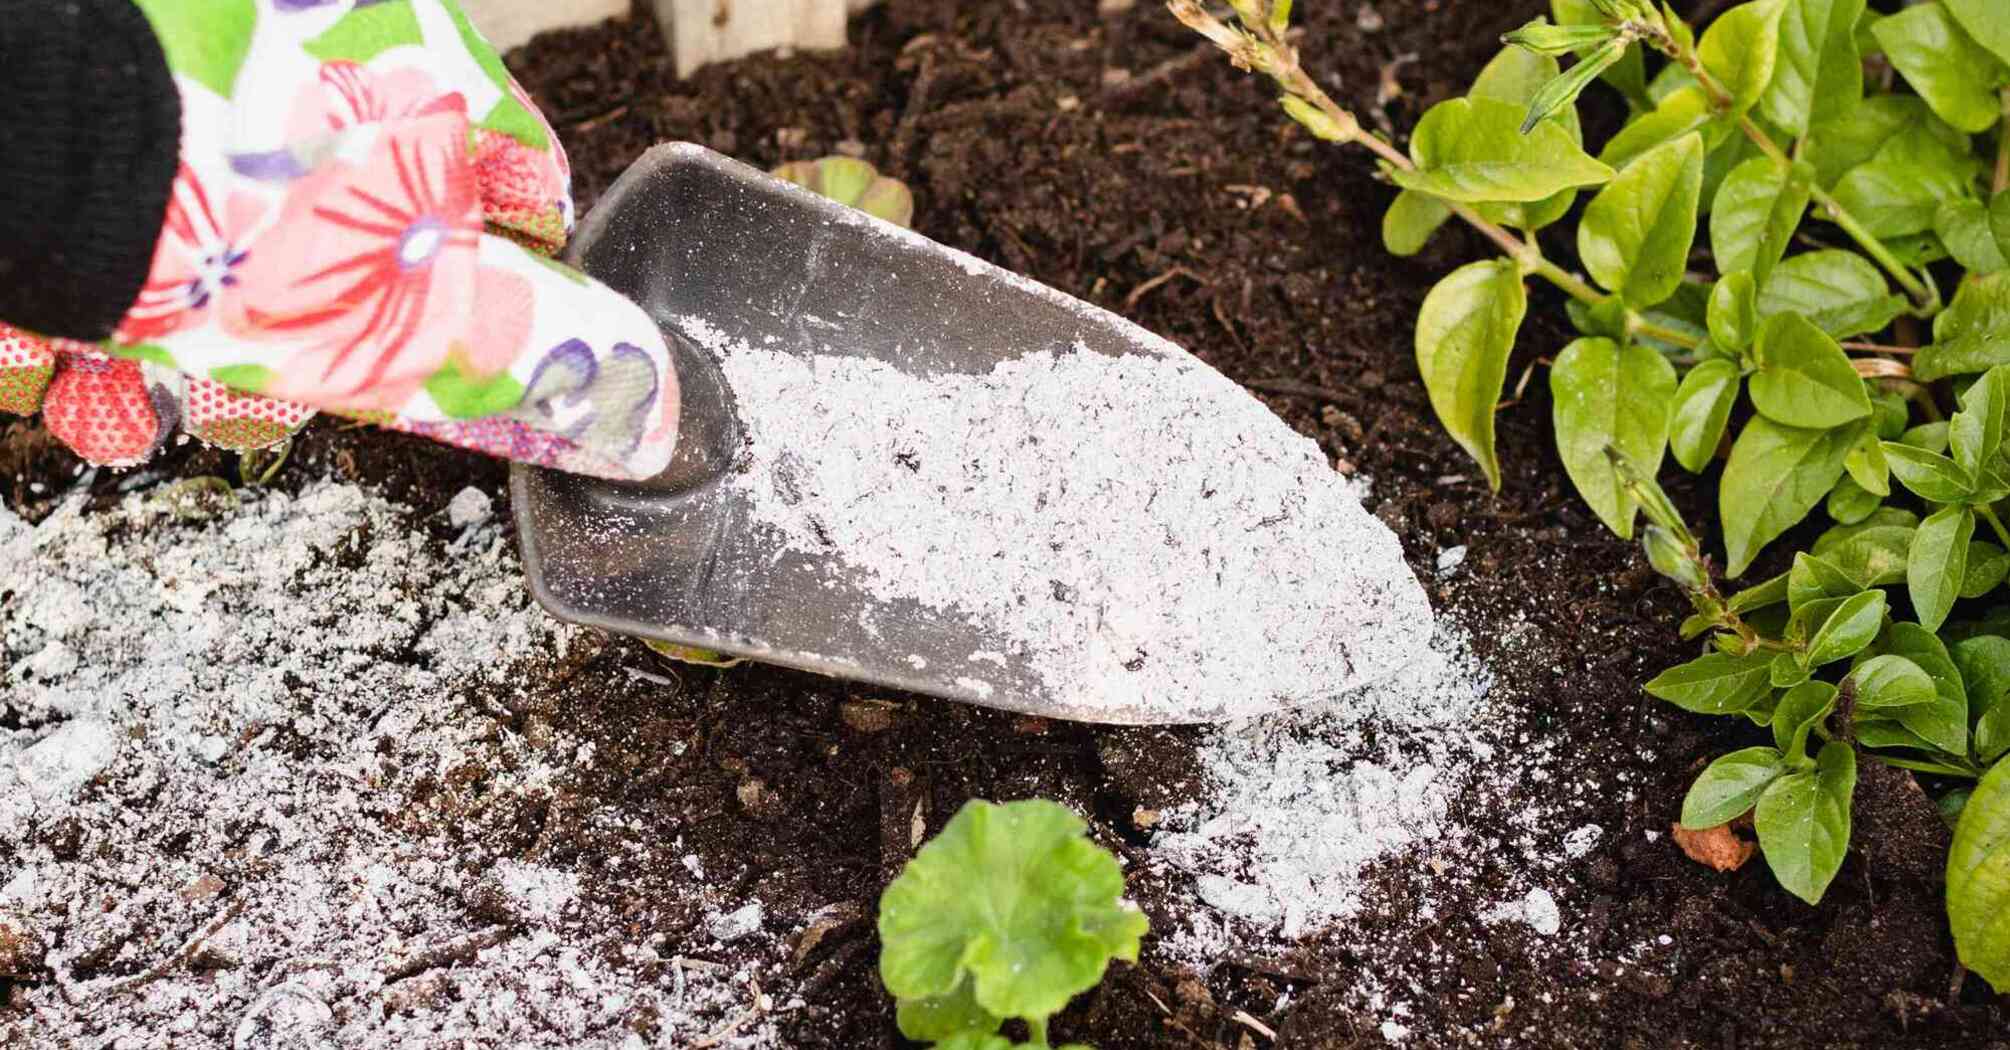 Using wood ash to protect plants